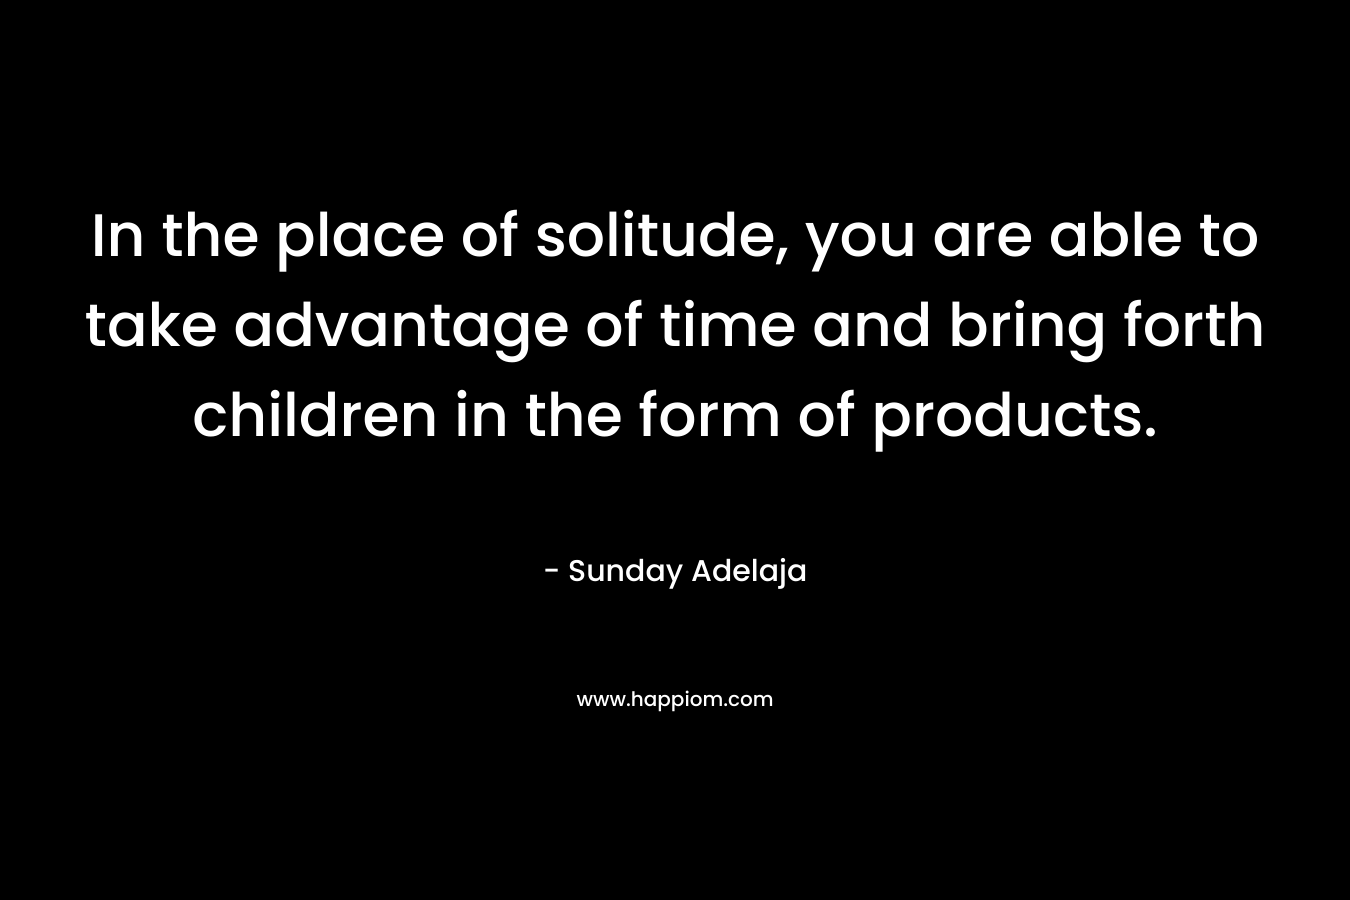 In the place of solitude, you are able to take advantage of time and bring forth children in the form of products.